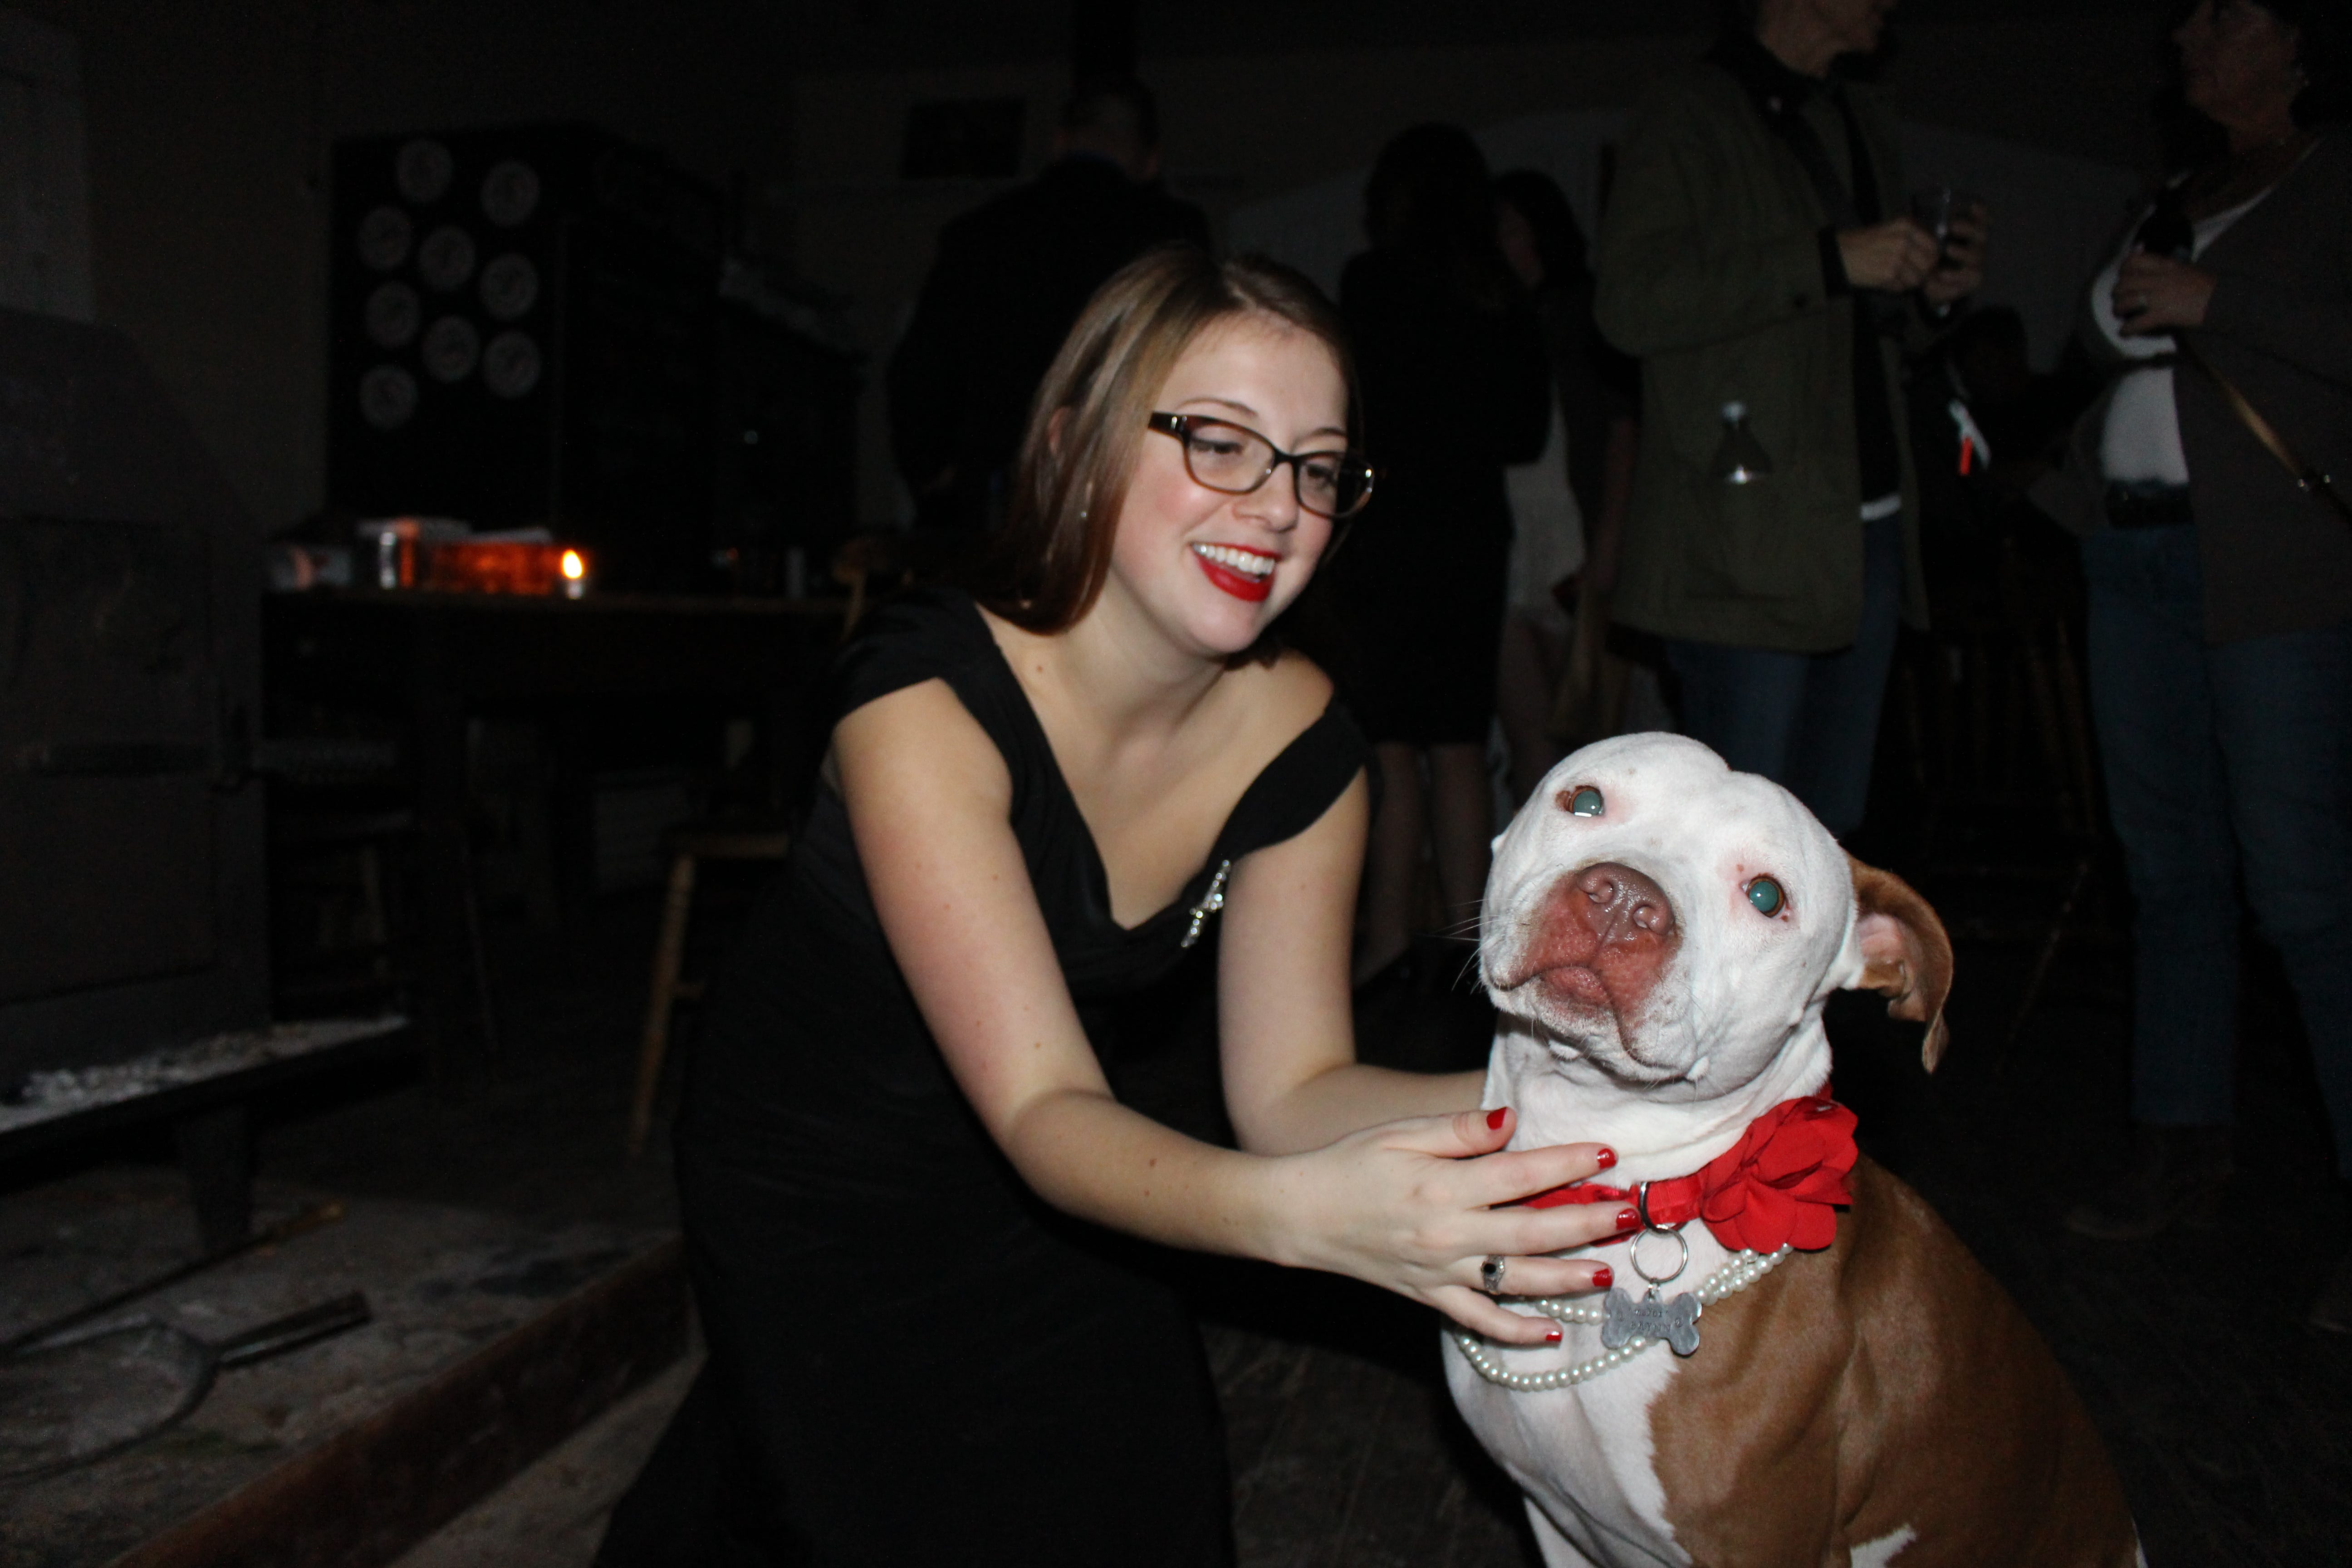 Rabbit Hash swears in fourth canine mayor at the Indawguration Ball